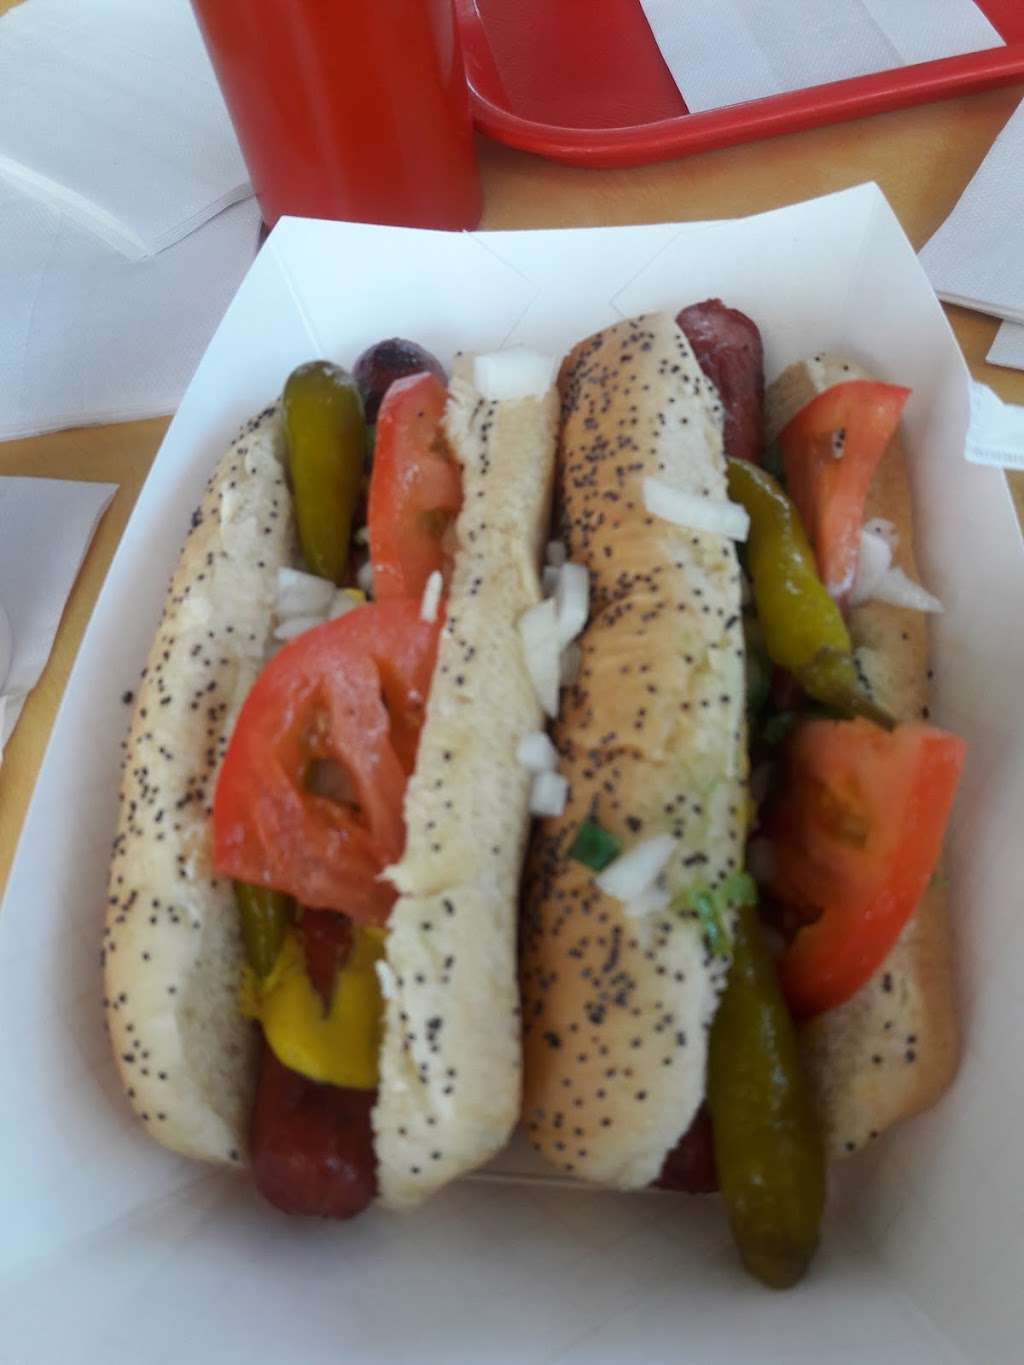 Scoobys Hot Dogs | 1020 E N Ave, West Chicago, IL 60185 | Phone: (630) 231-4848